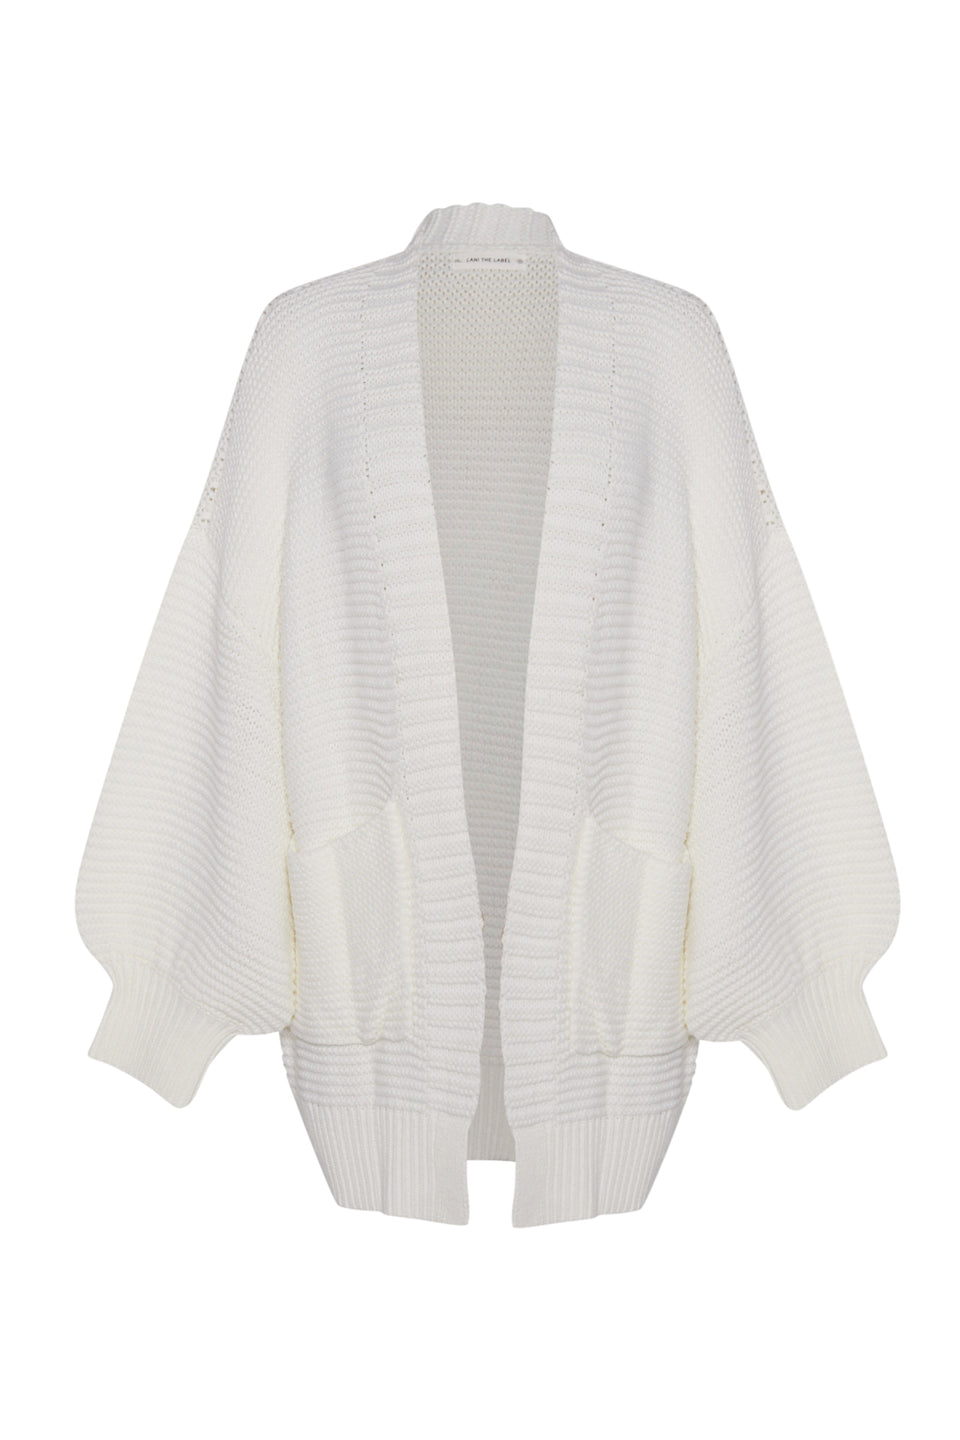 lani_the_label_brittany_cardigan_sweater_white